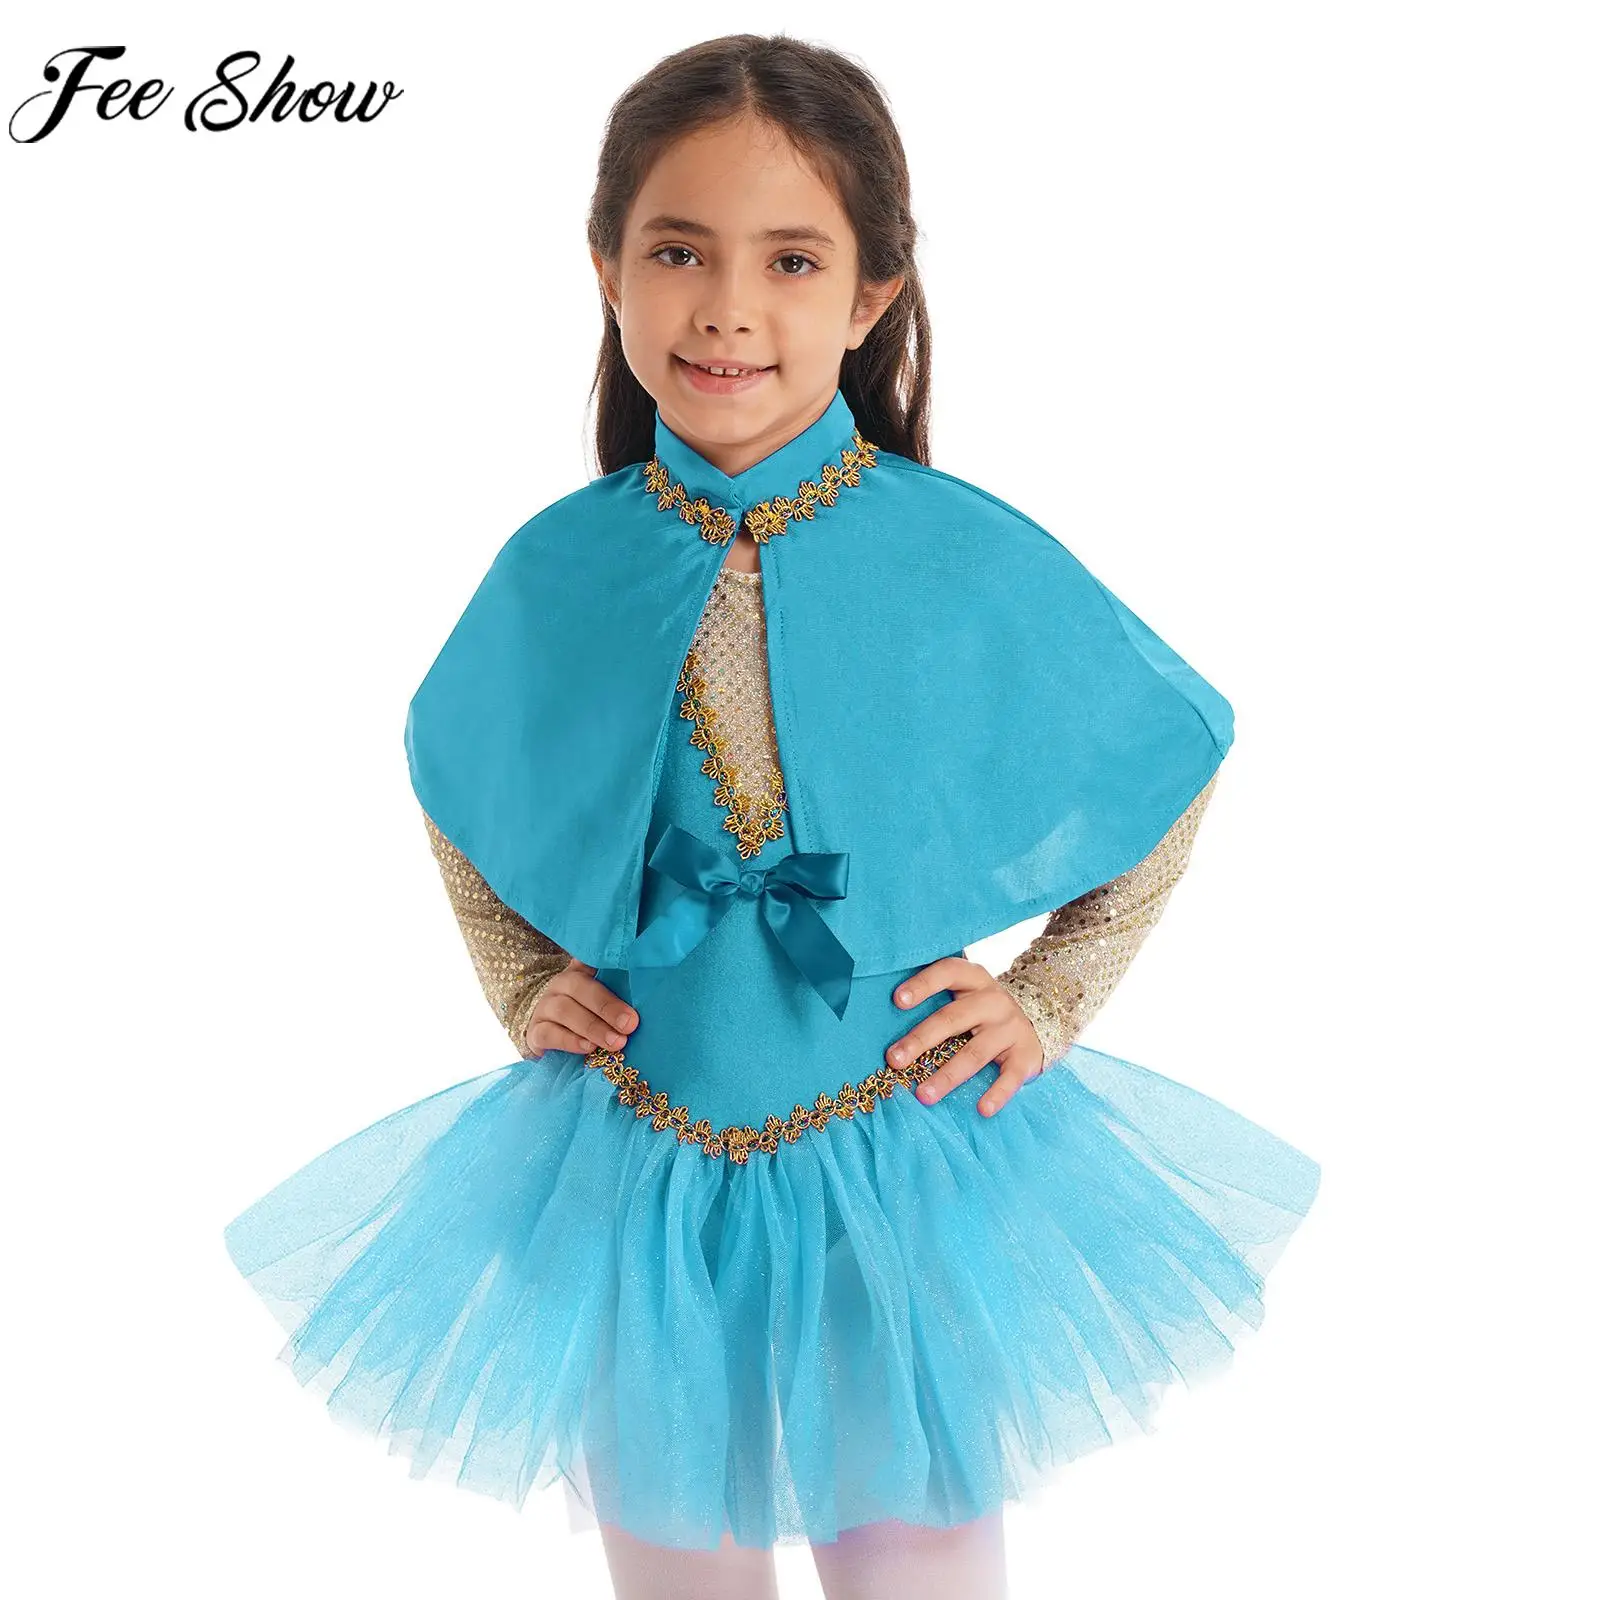 

Kid Girls Halloween Cosplay Costume Sequin Mesh Leotard Tutu Dress with Cape Arm Sleeves Theme Party Carnival Performance Outfit